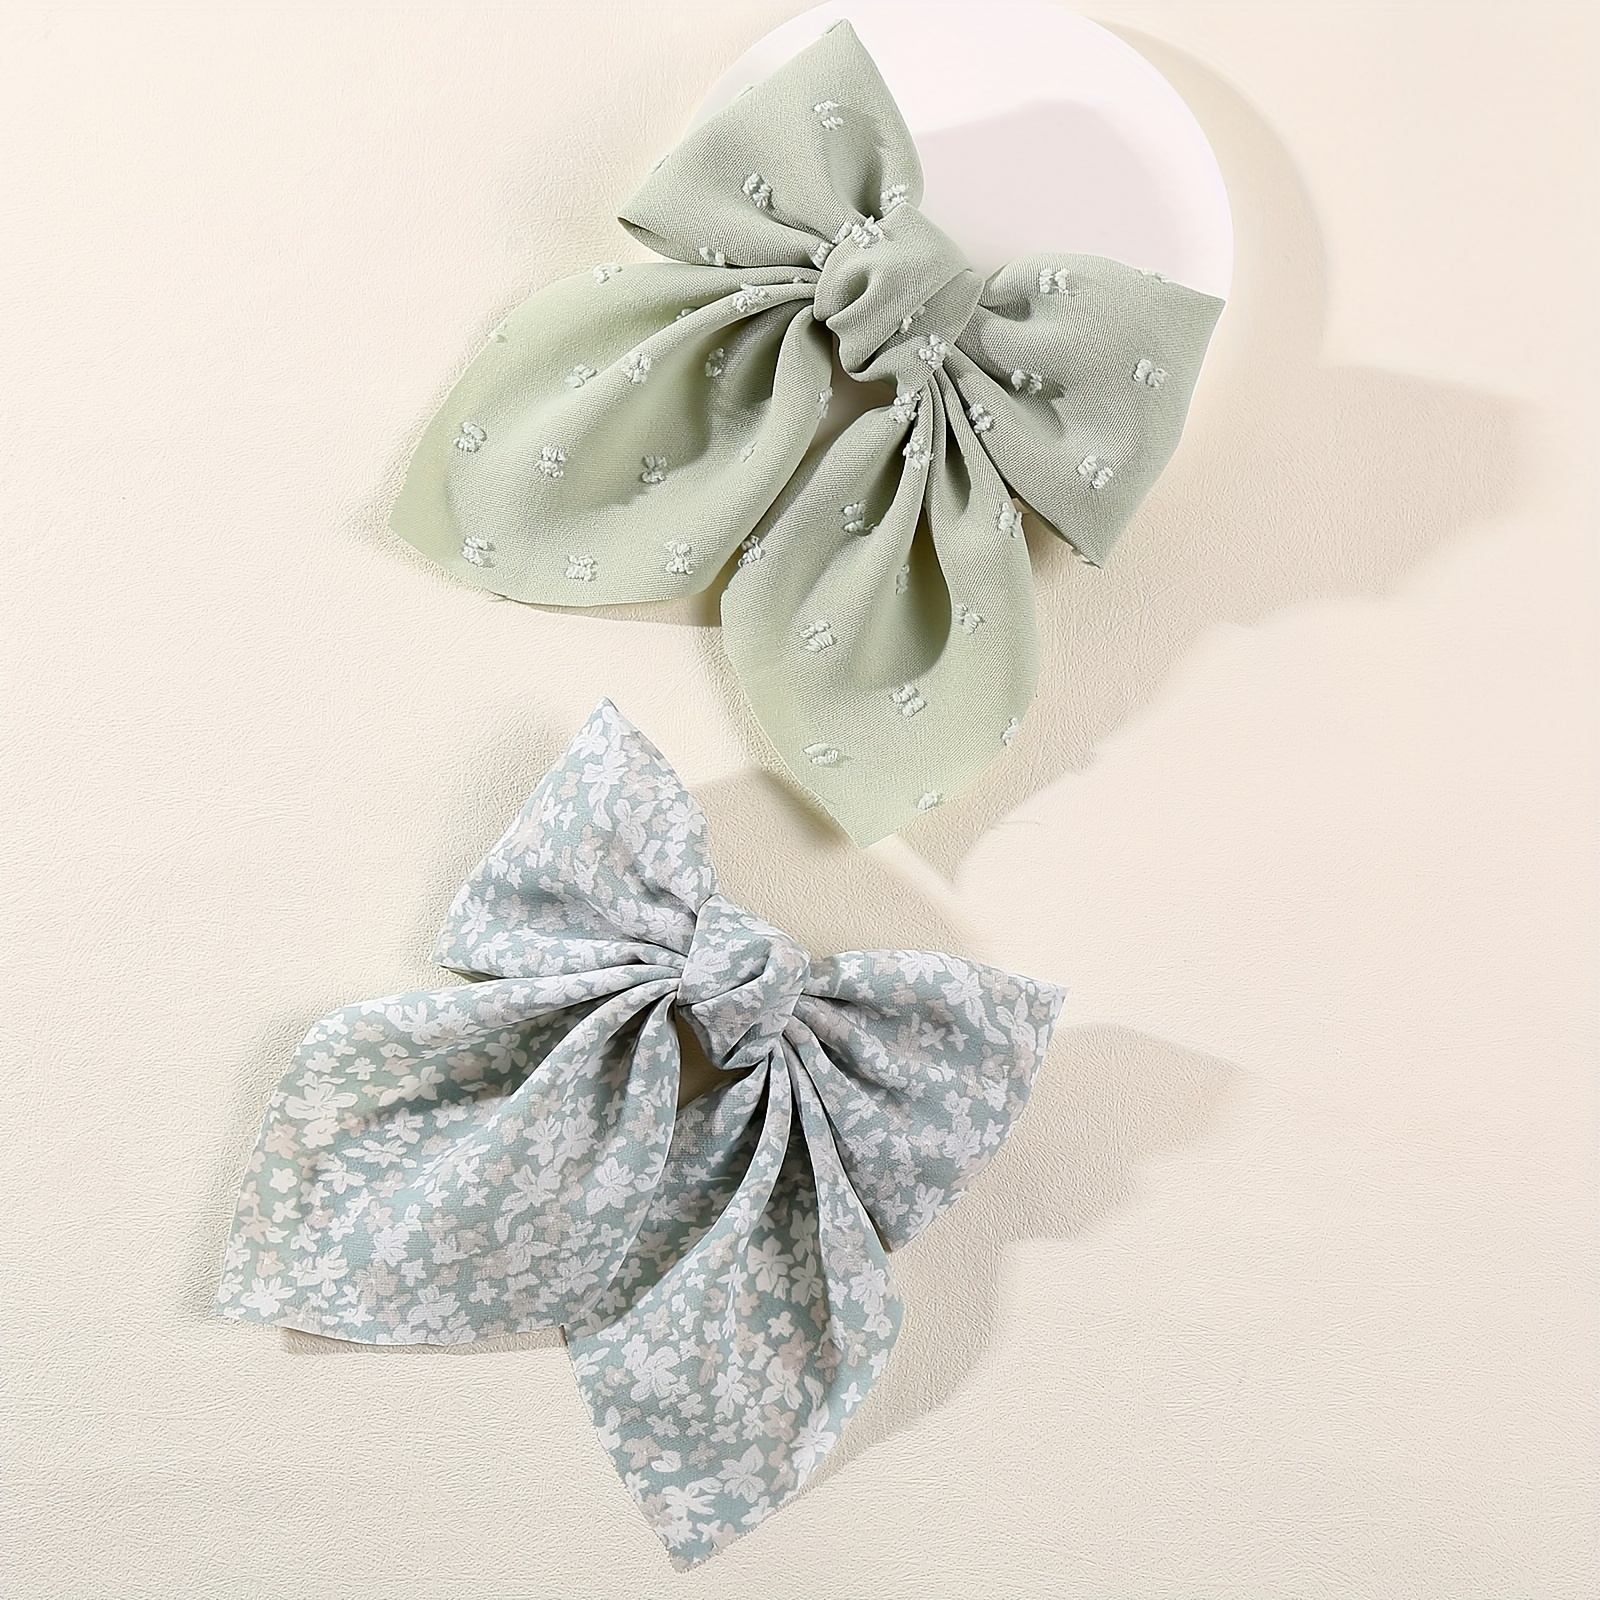 White 5.5 Inch Grosgrain Hair Bow Clip For Woman And Girls